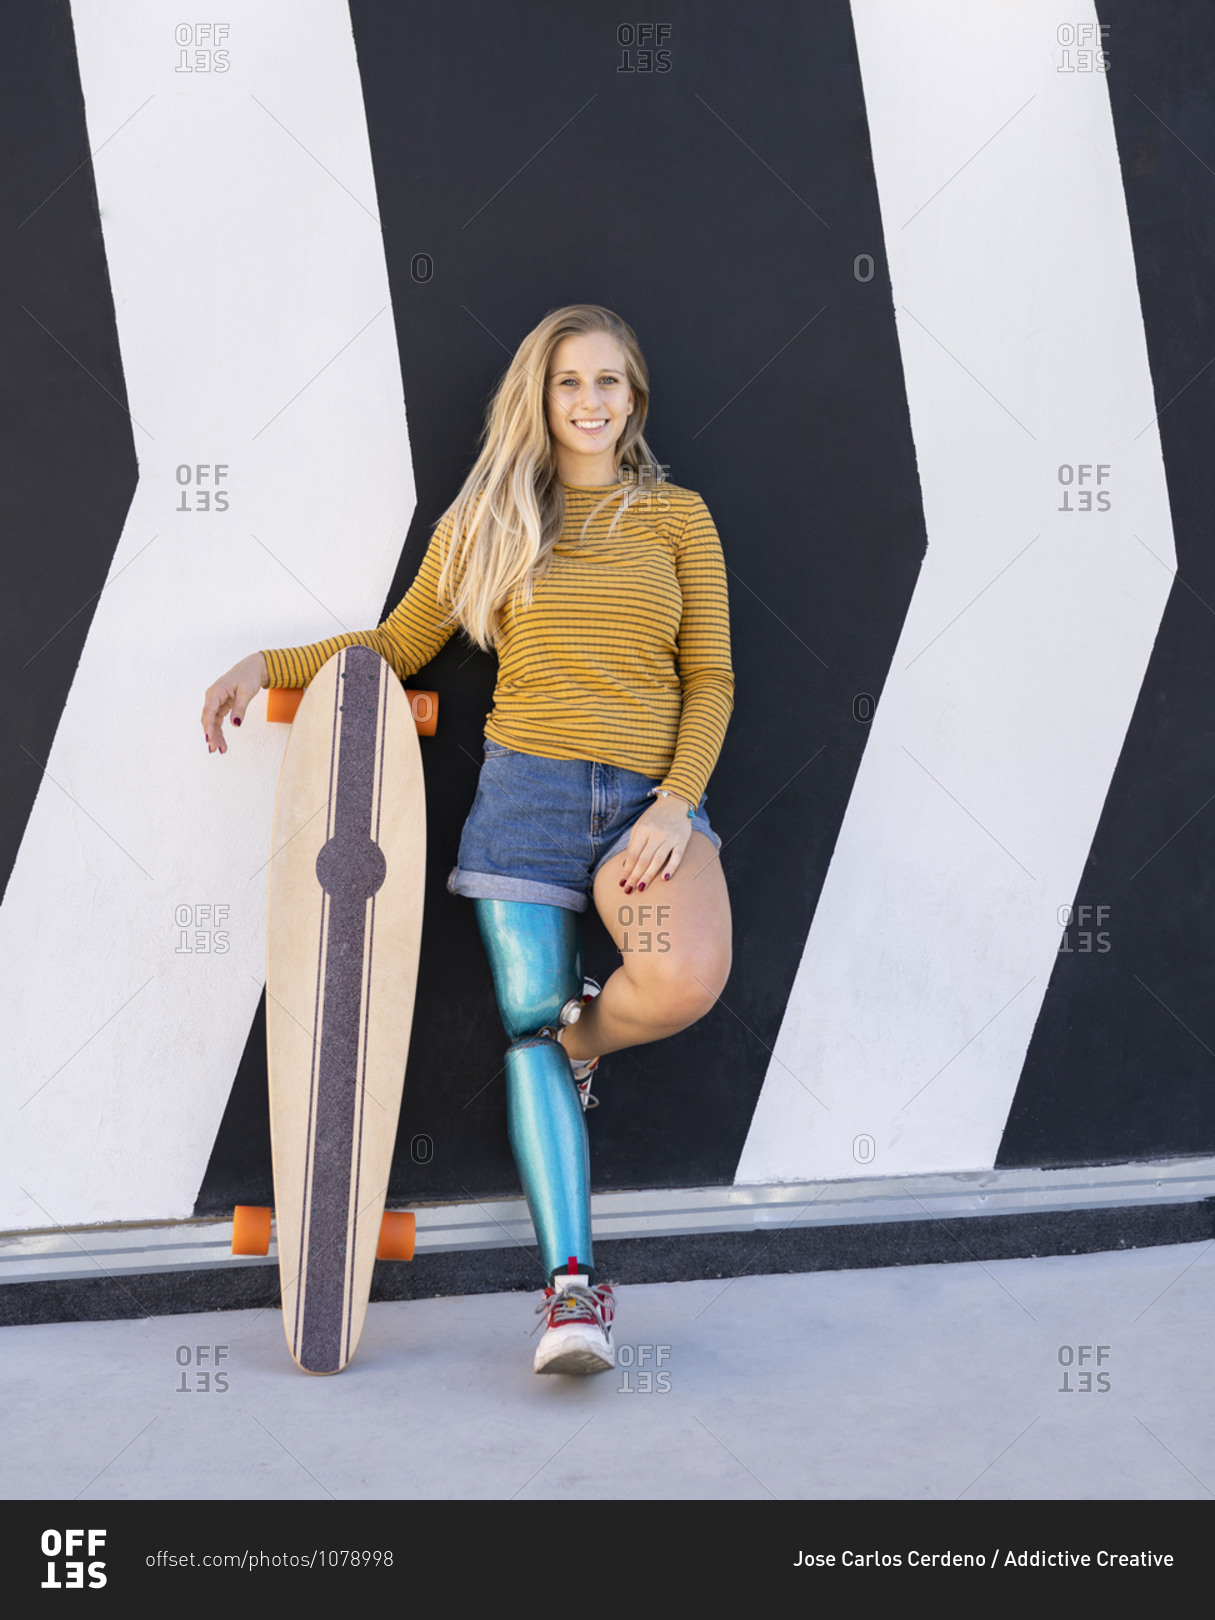 Delighted female skater with bionic prosthesis of leg standing near building in street and looking at camera